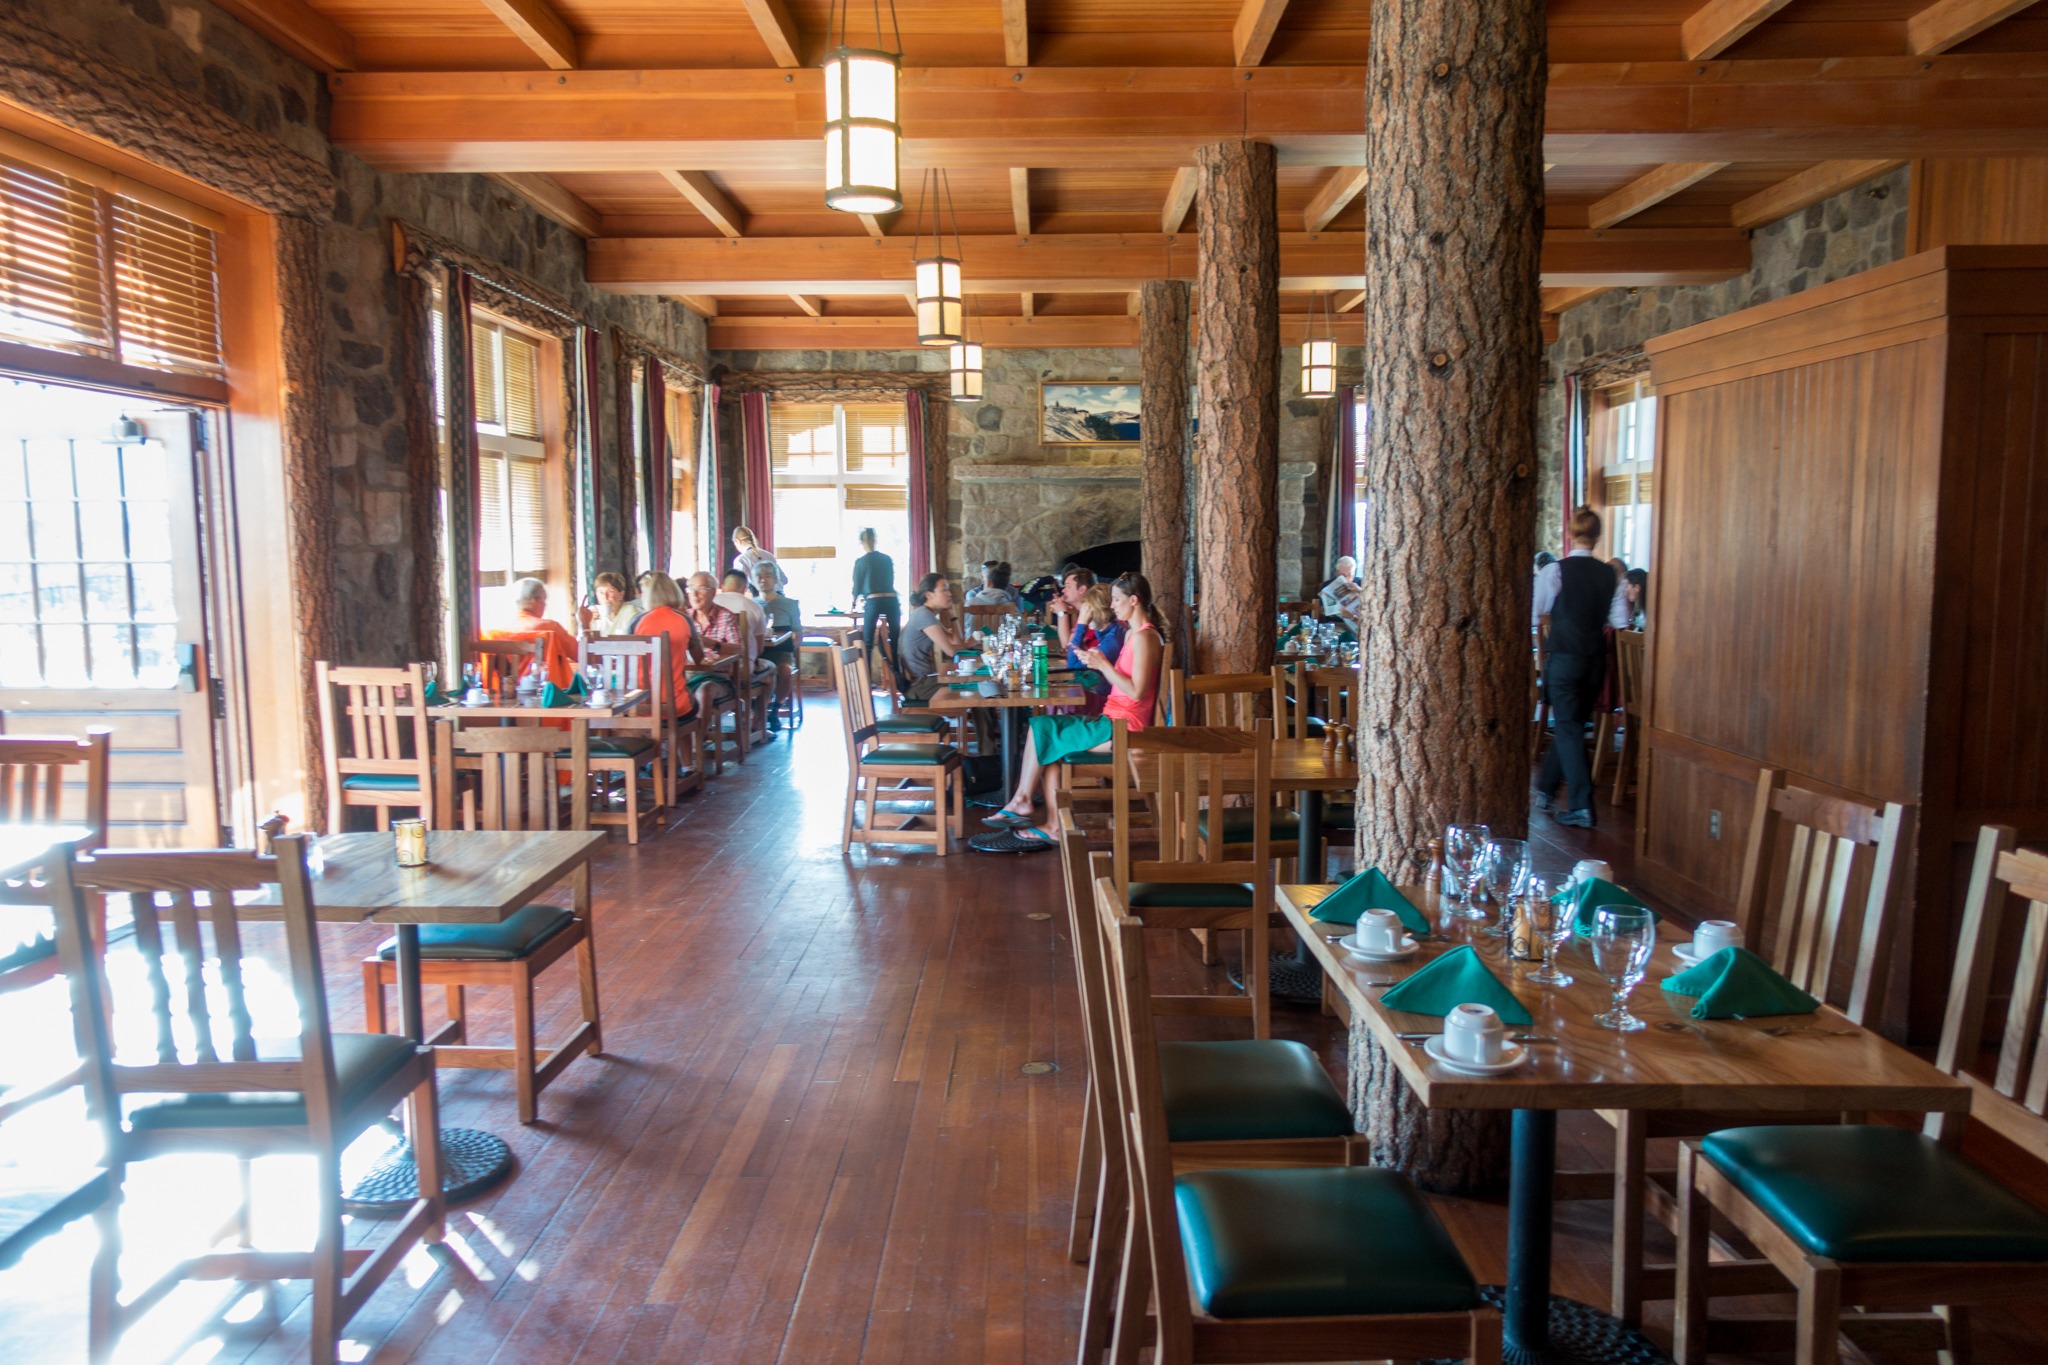 crater lake dining room